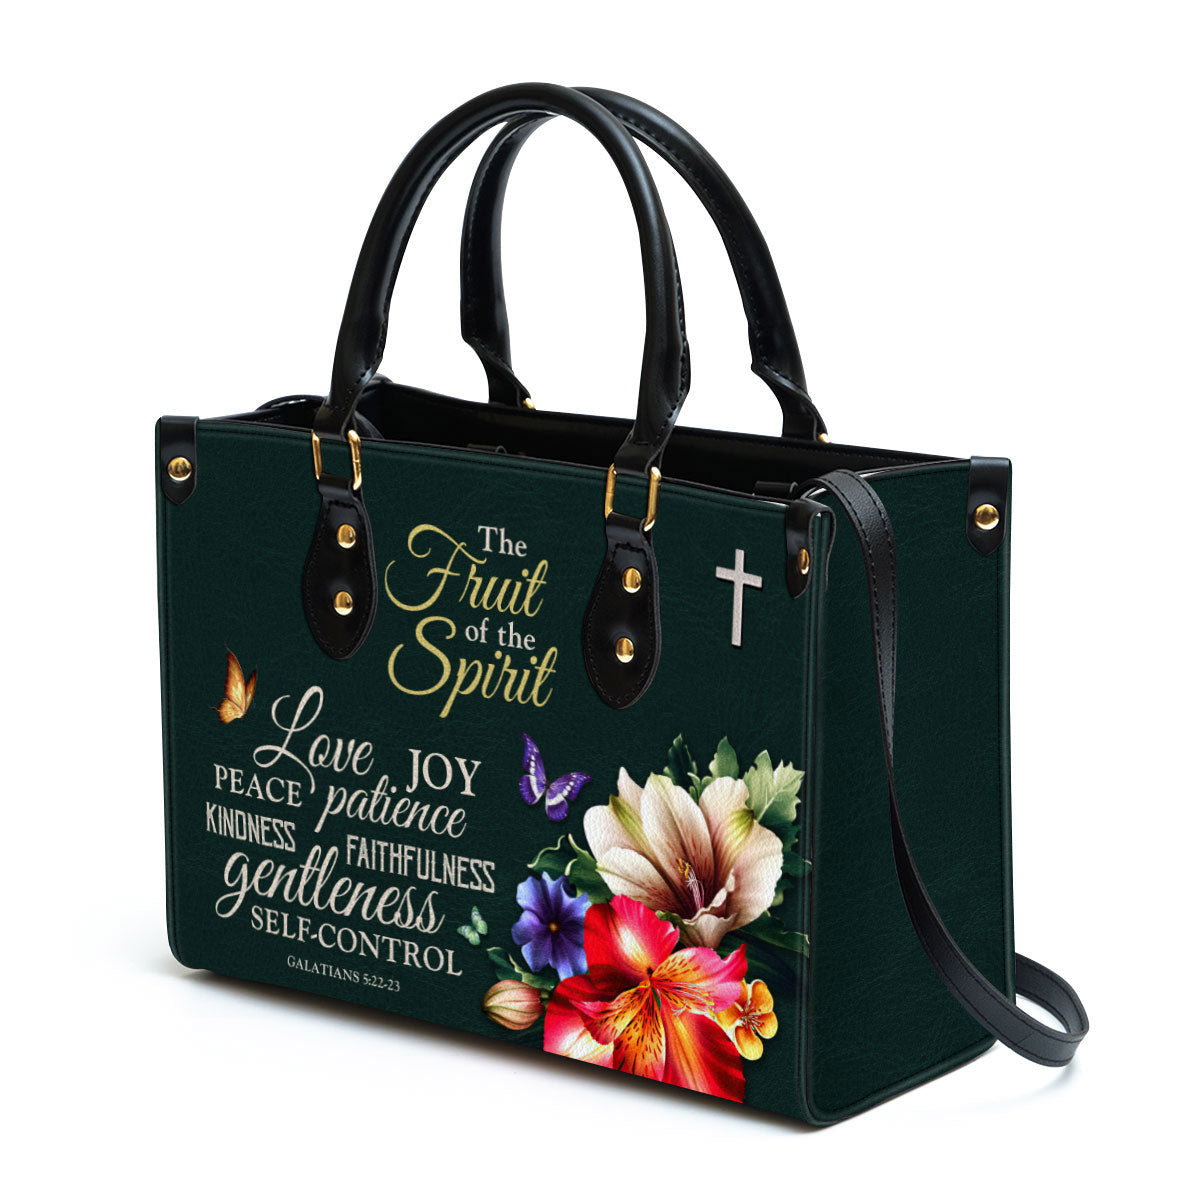 Zippered Flower Leather Handbag With Handle Galatians 522-23 The Fruit Of The Spirit Spiritual Gift For Christian Women